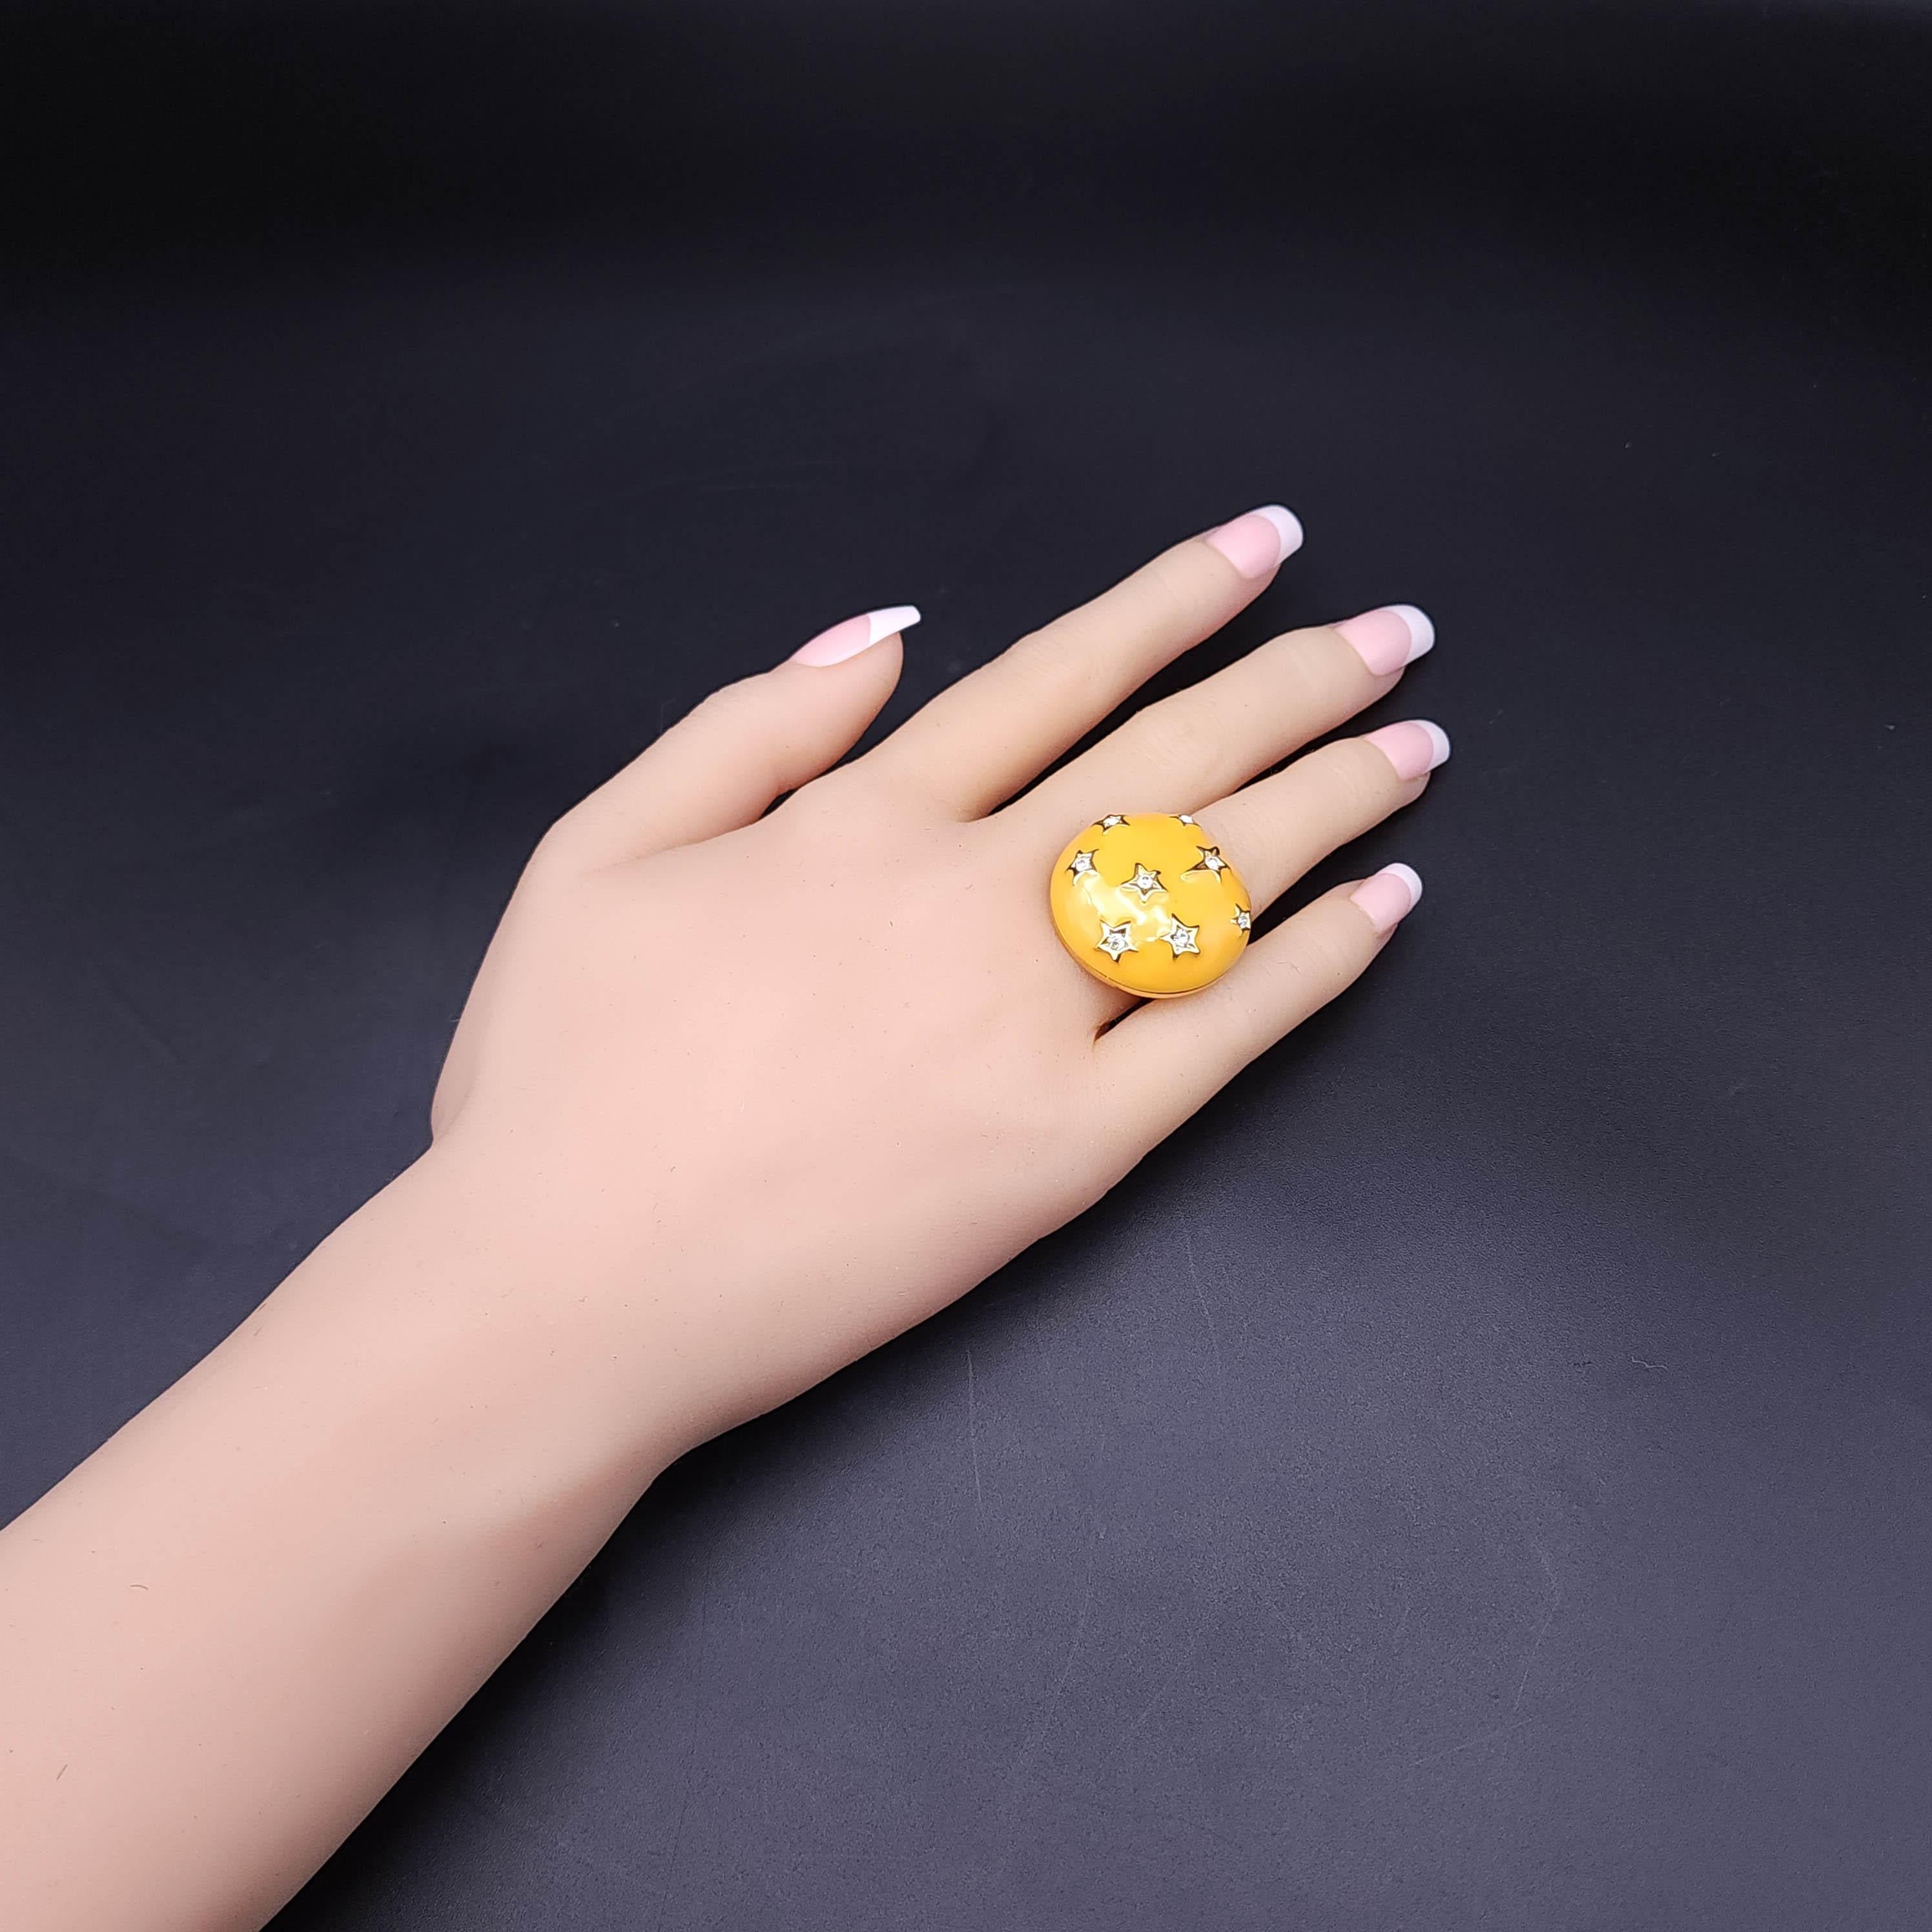 Add a splash of sunshine to your ensemble with this Kenneth Jay Lane cocktail ring. This vibrant piece boasts a radiant yellow enamel setting, adorned with gold star accents that each cradle a sparkling clear crystal. The adjustable band ensures a